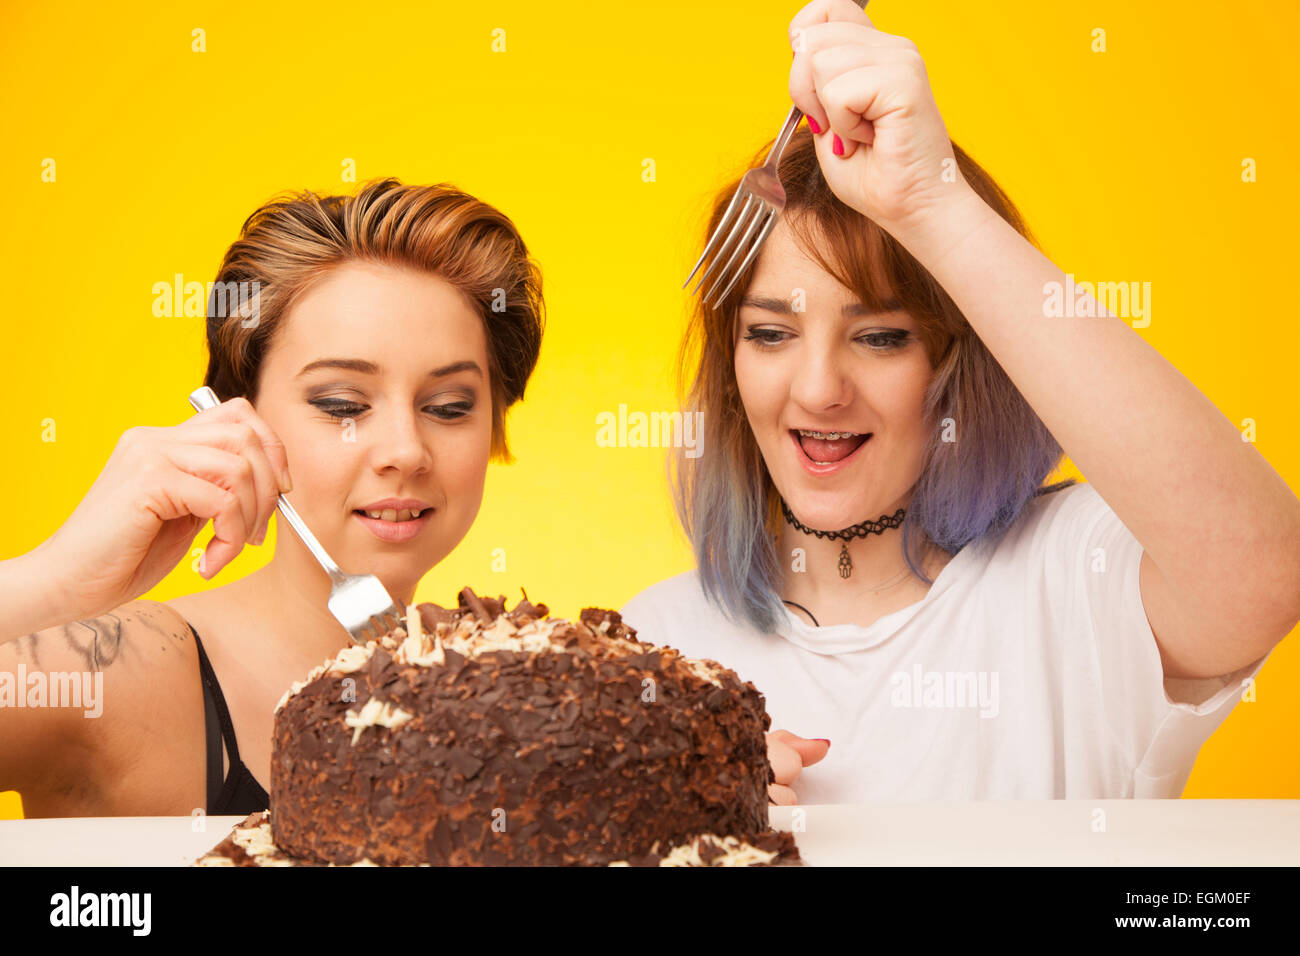 Two young woman about to eat a large chocolate cake. Stock Photo